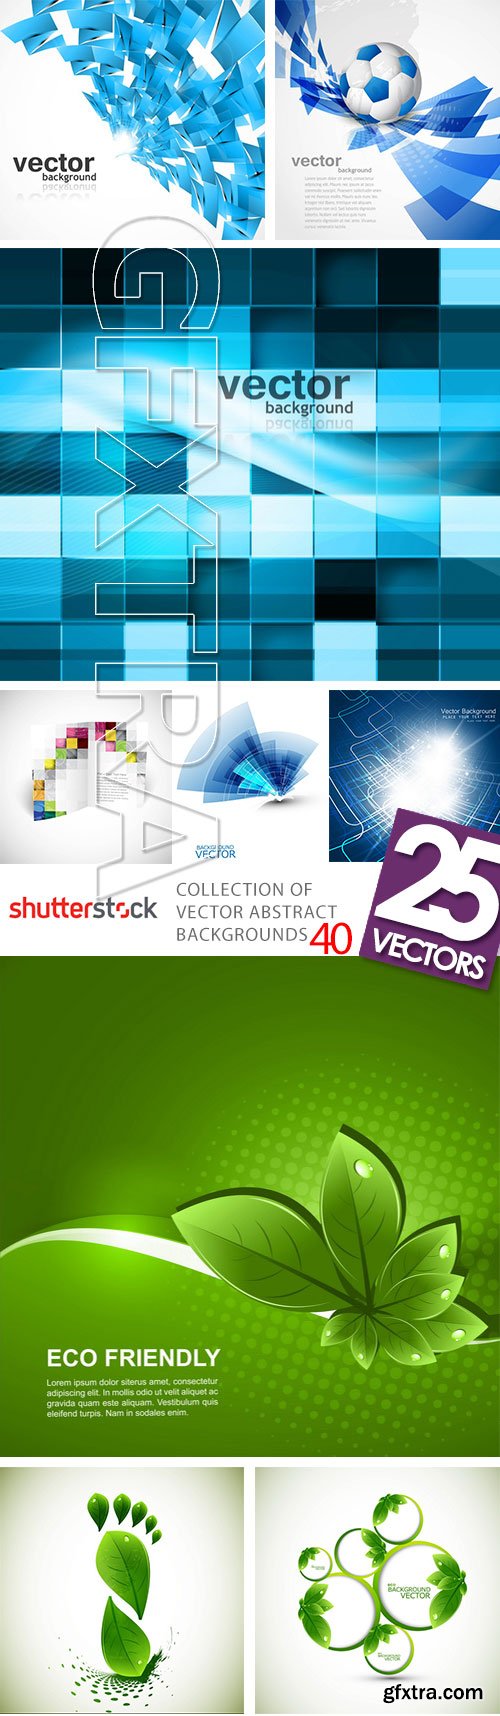 Collection of Vector Abstract Backgrounds Vol.40, 25xEPS